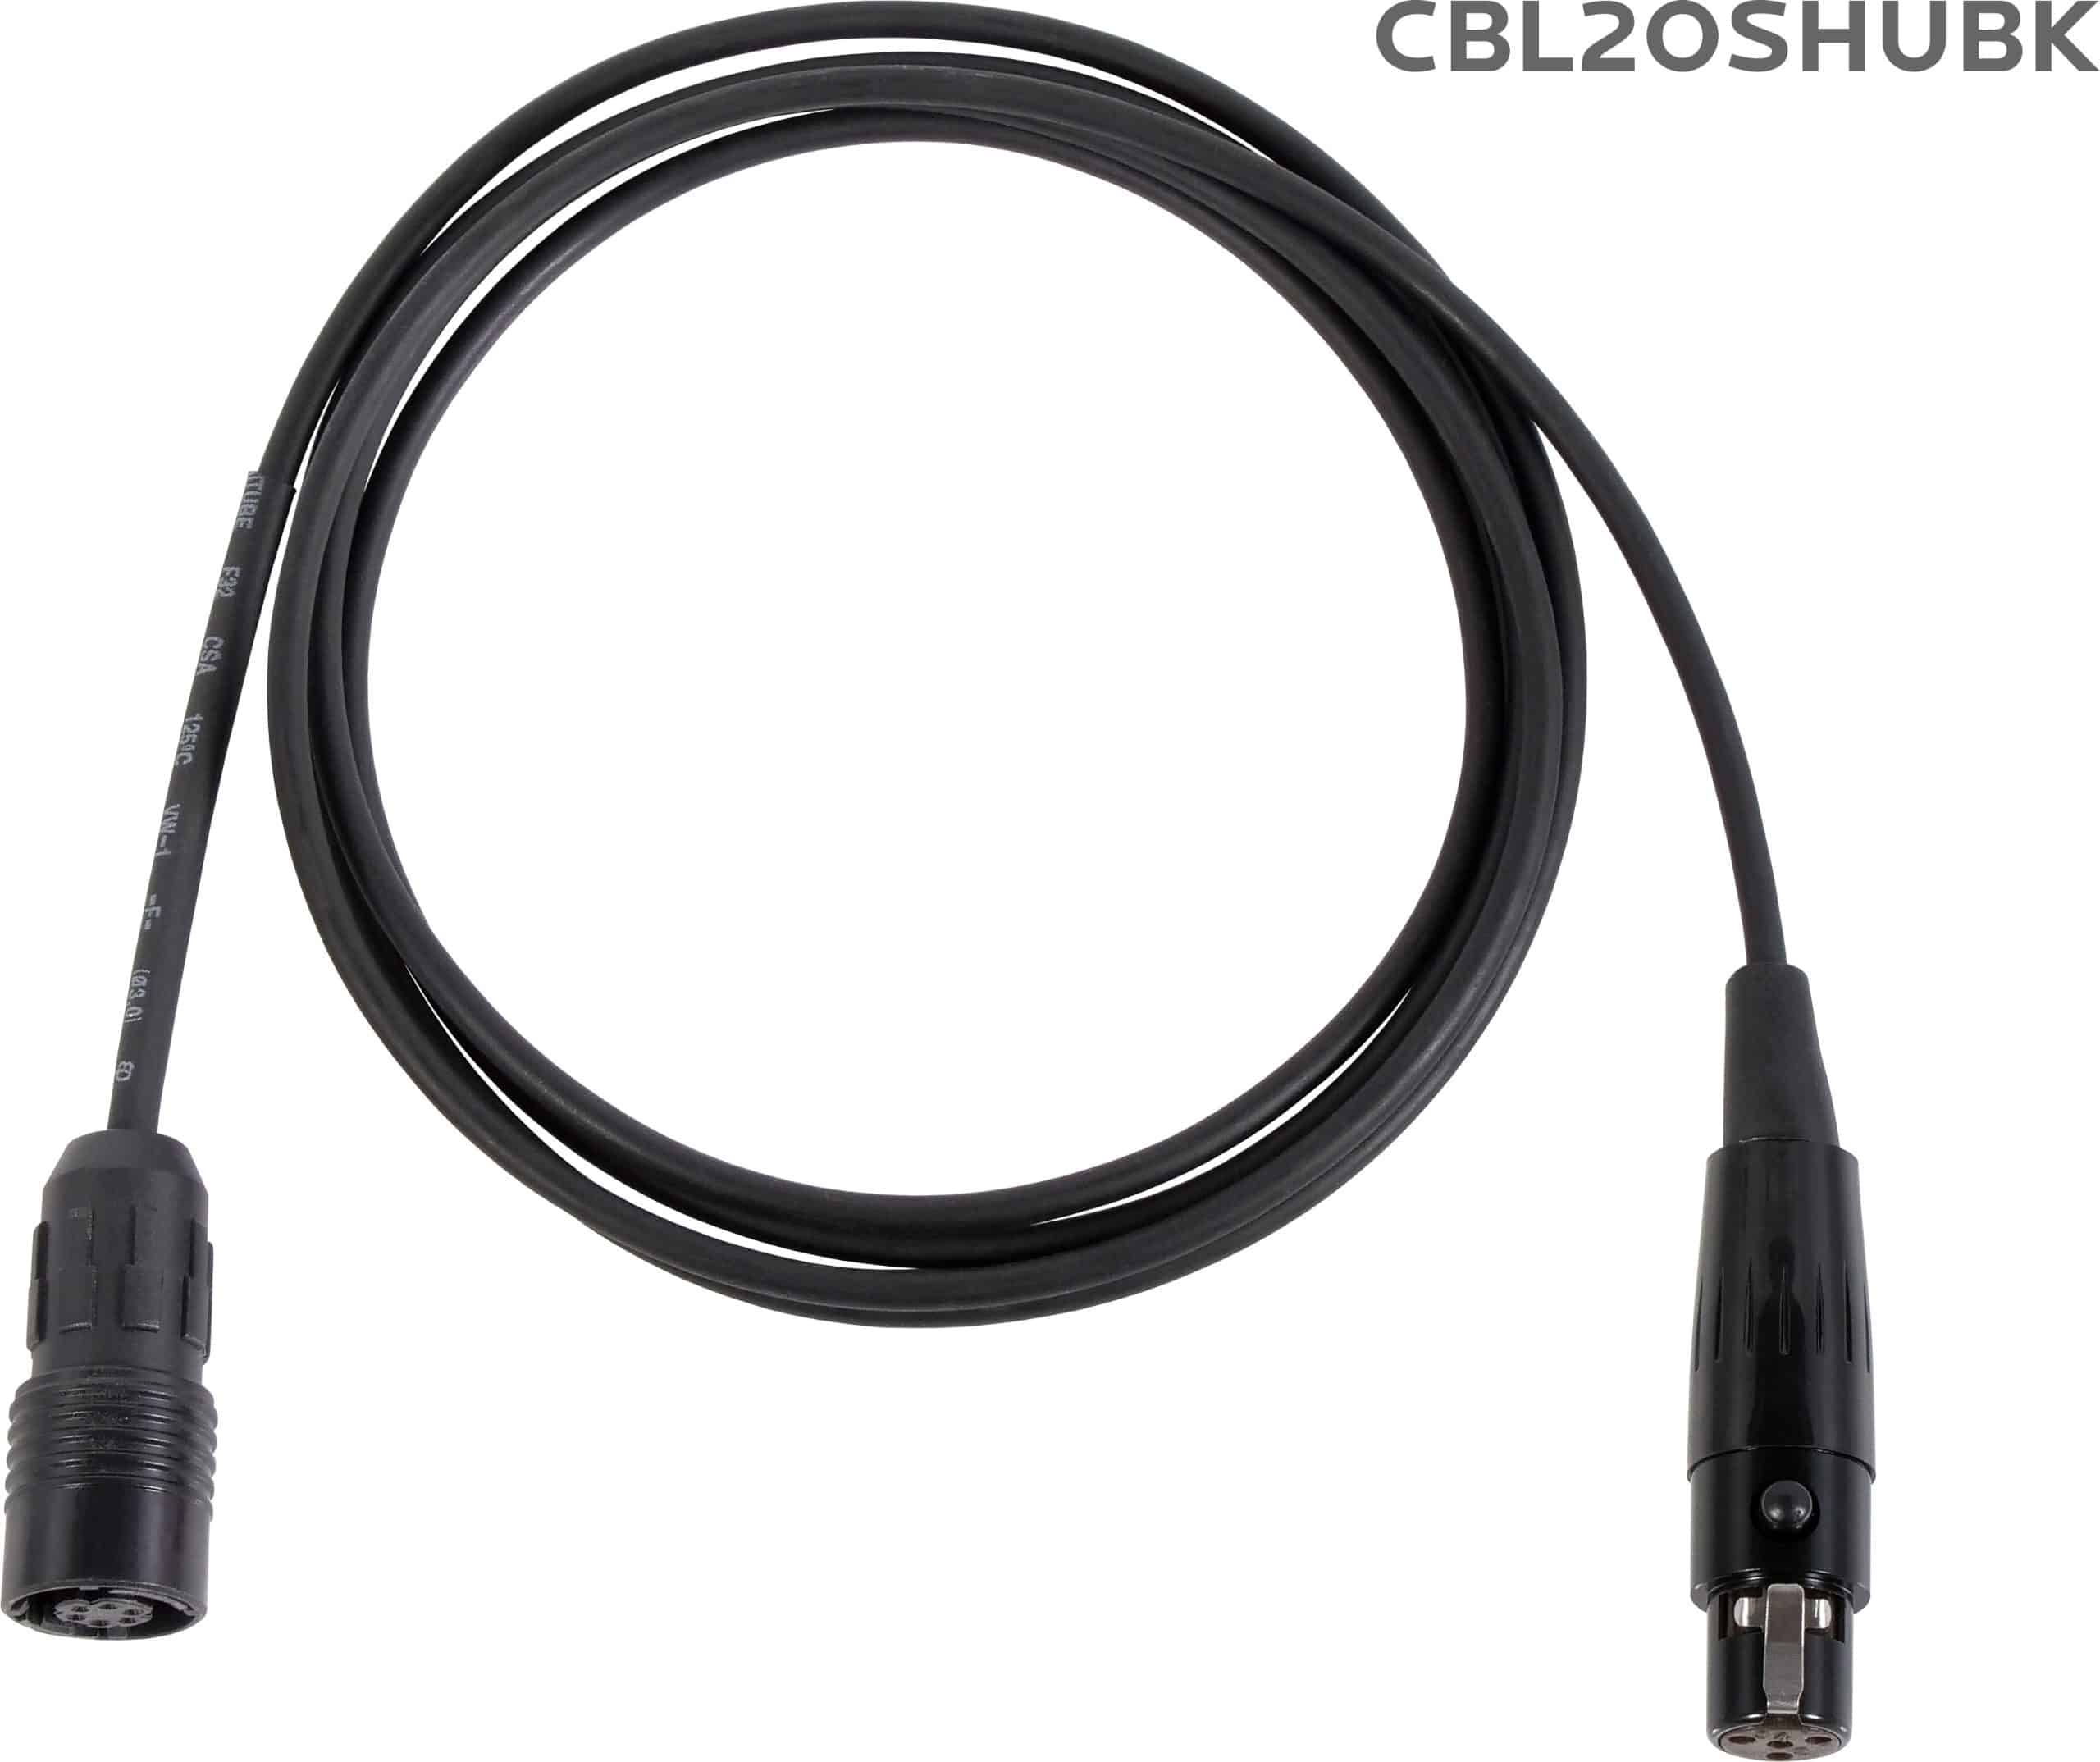 Replacement cable for H2O7 Wireless Headset Mic. The cable is wired to work with Shure® systems.